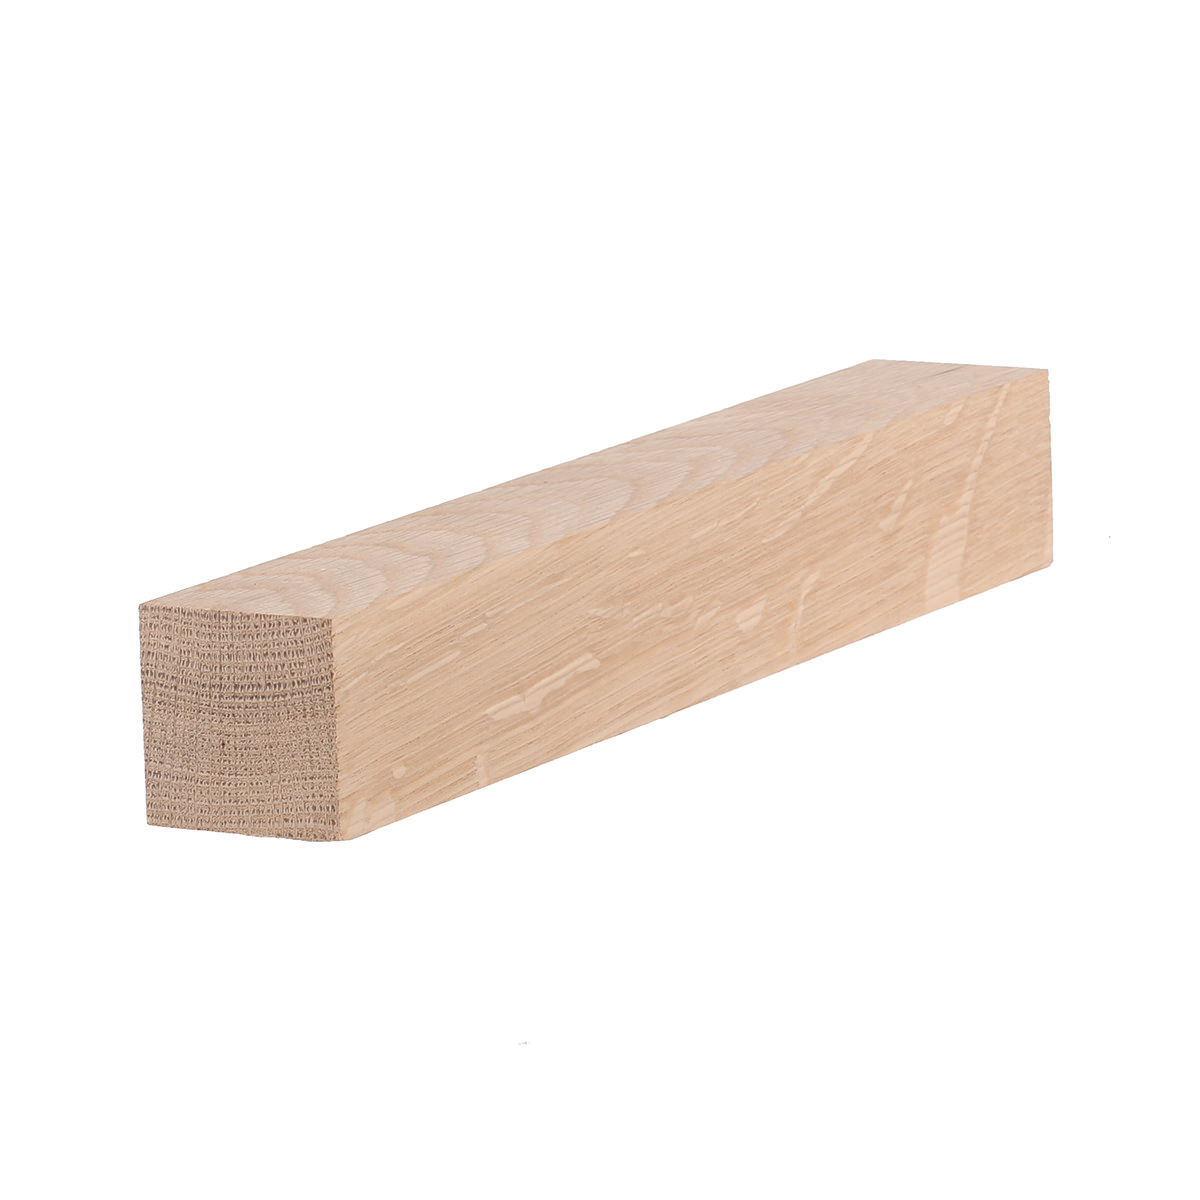 2x2 (13/4" x 13/4") White Oak S4S Lumber & Square Stock from Baird Brothers